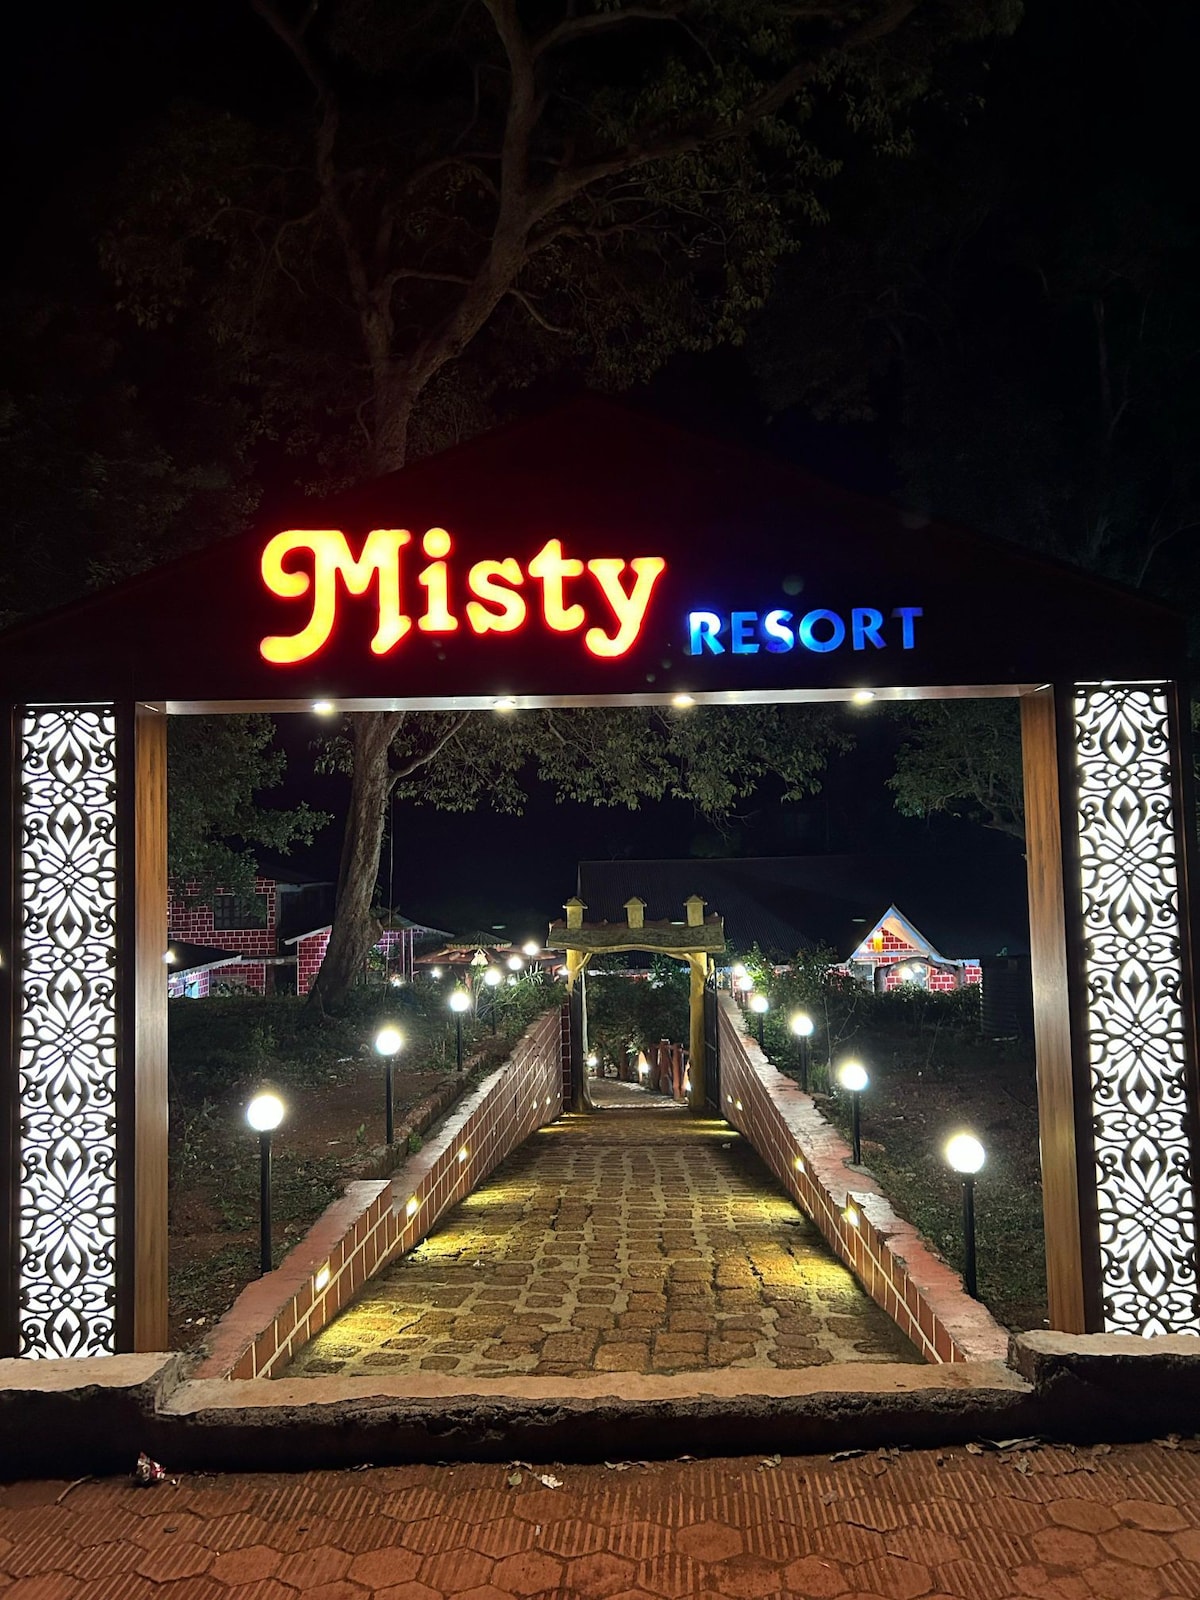 misty vibes
best offers on group bookings